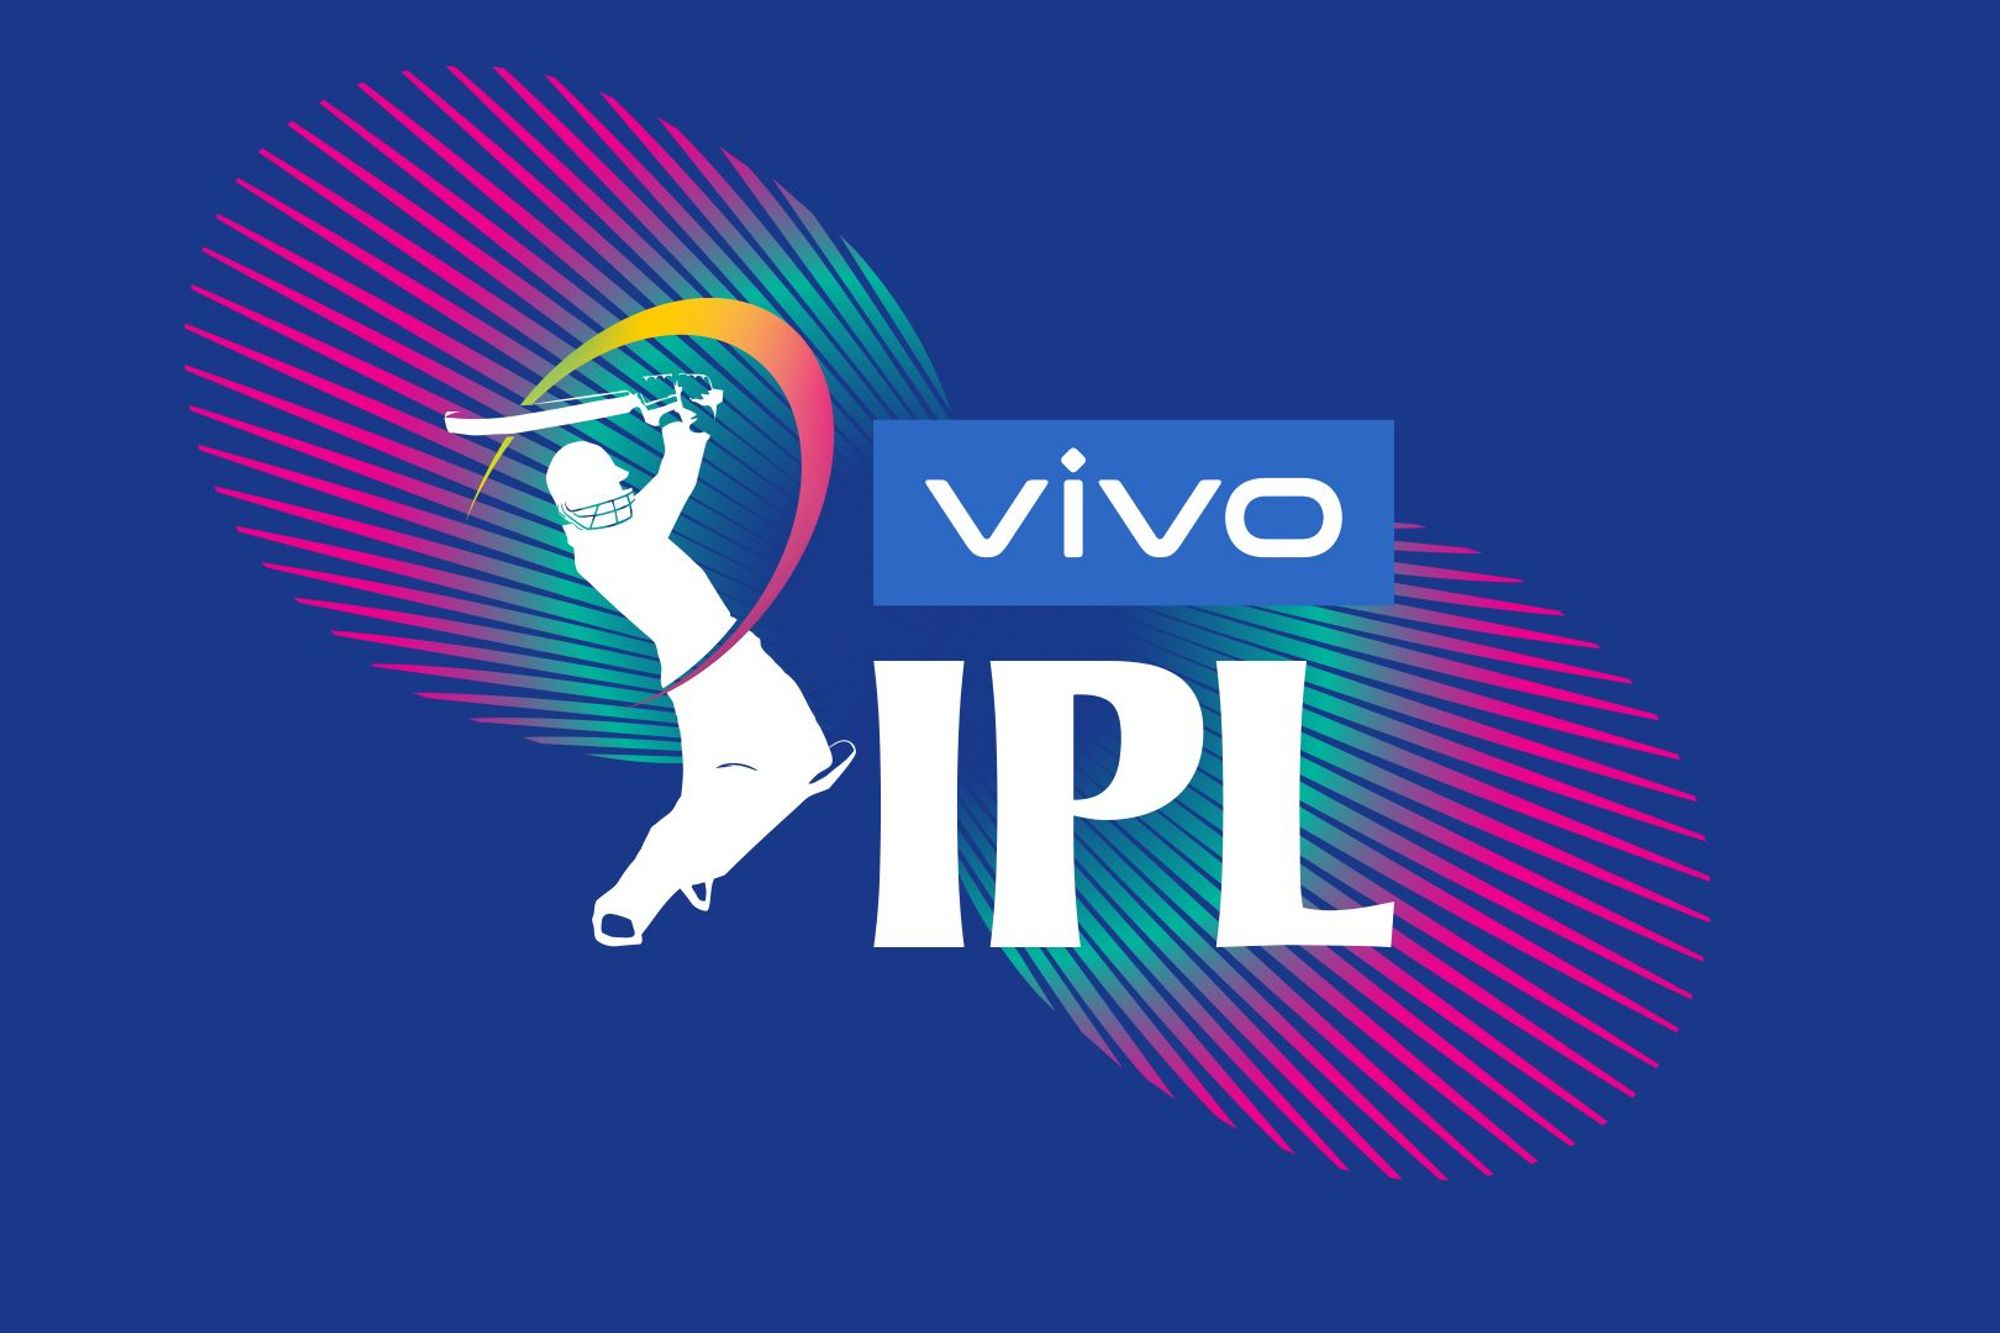 VIVO IPL 2019: Live Stats, Point Table, Most Runs, Wickets, Fours, Sixes & Records!